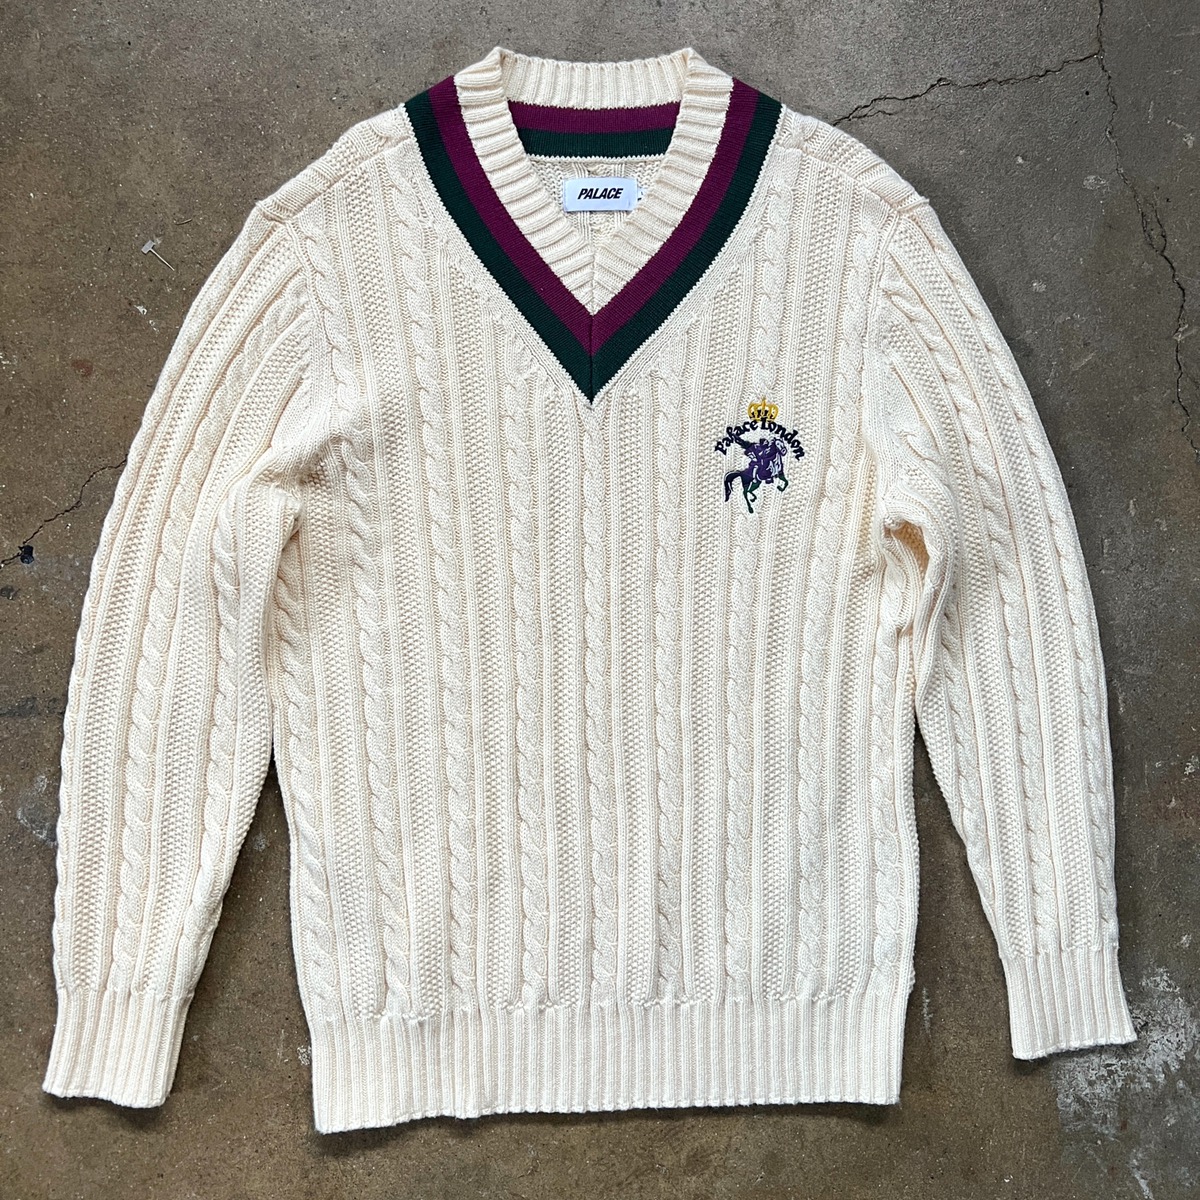 Palace Cable Knit Sweater - 1